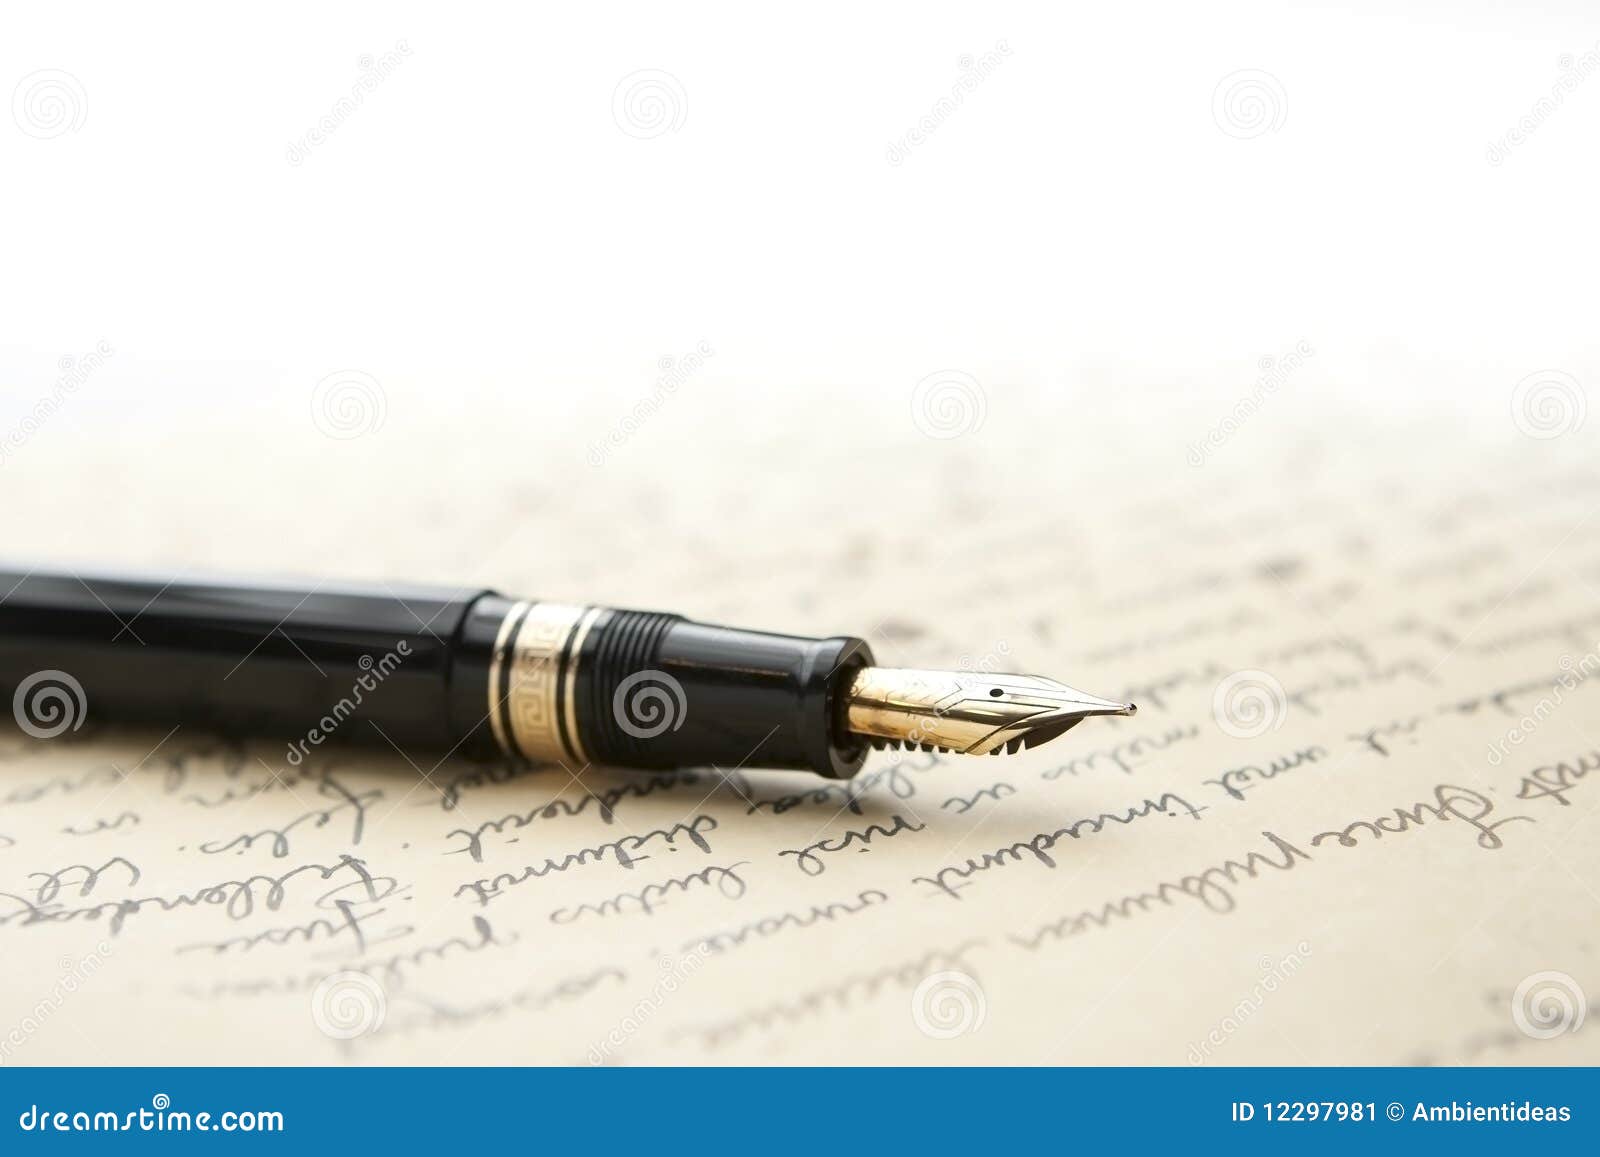 gold pen with letter and writing